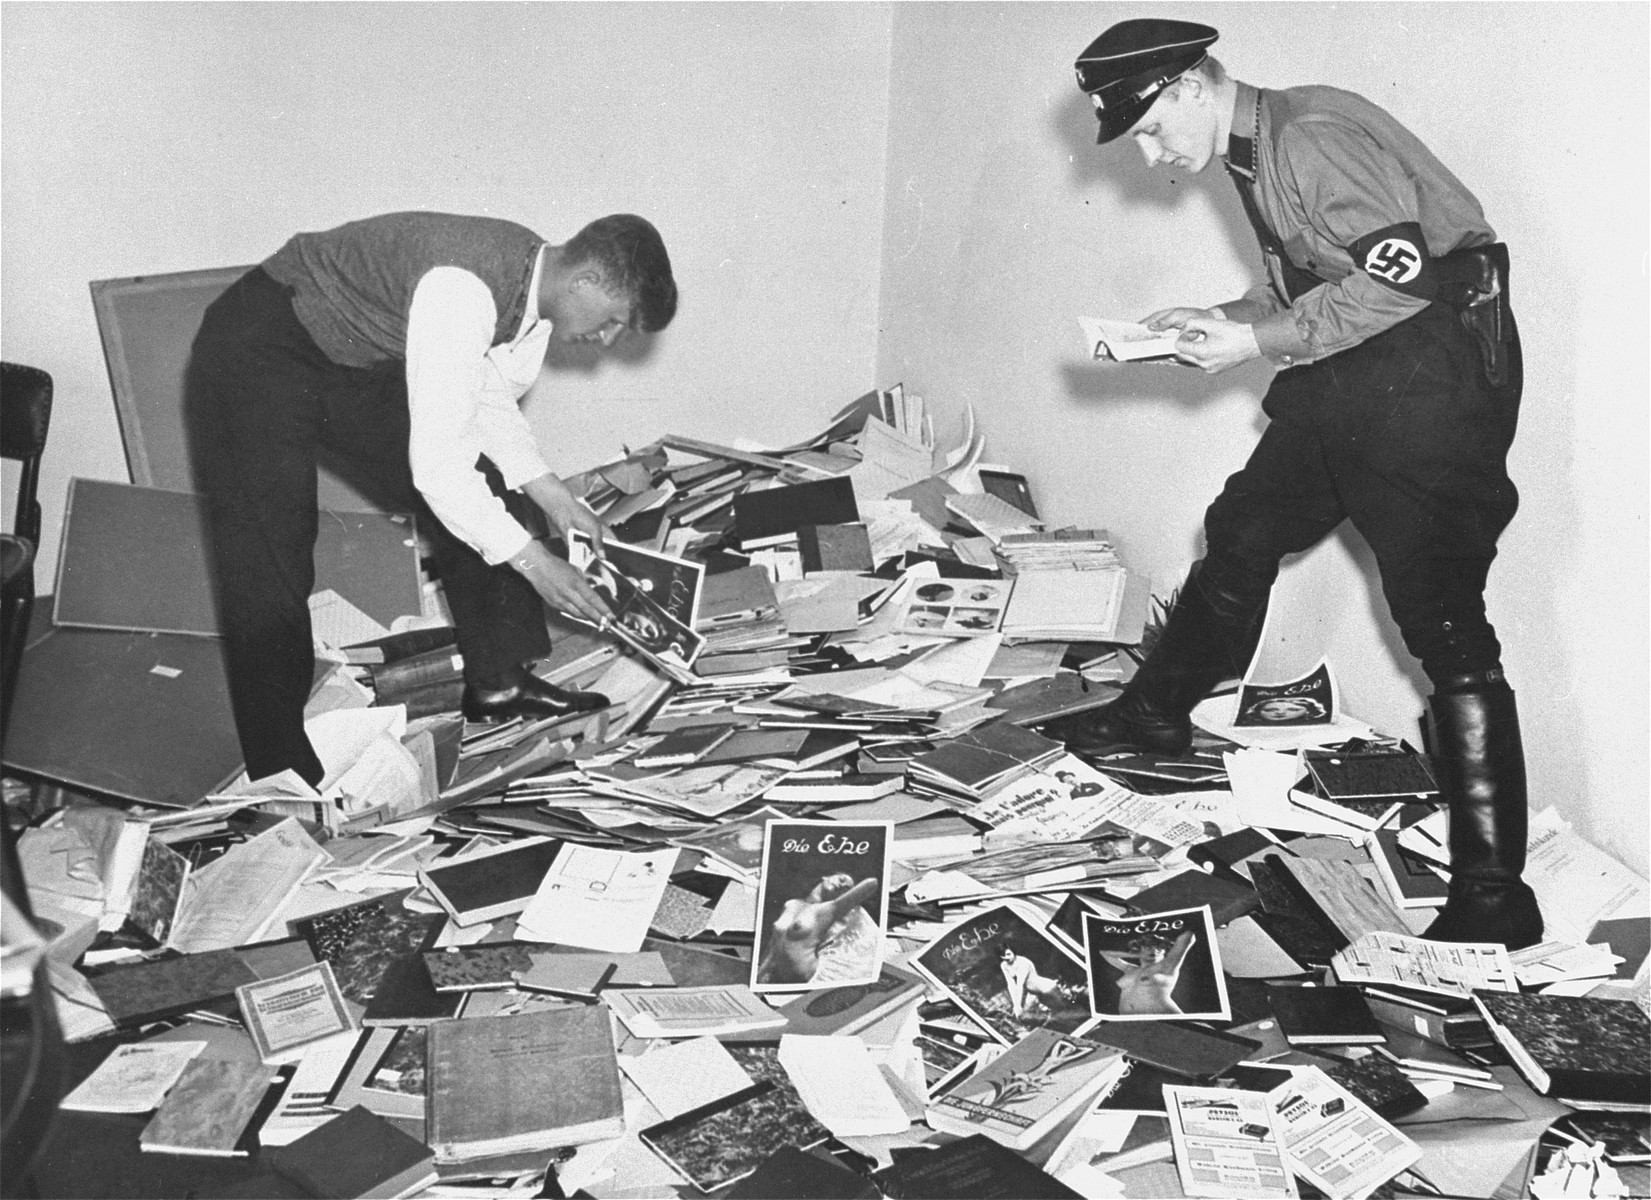 German students and Nazi SA plunder the library of Dr. Magnus Hirschfeld, Director of the Institute for Sexual Research in Berlin. The materials were loaded onto trucks and carted away for burning. The public library of the Institute comprised approximately 10,000 mostly rare German and foreign books on the topics of sex and gender. (Manfred Baumgardt, Berlin)